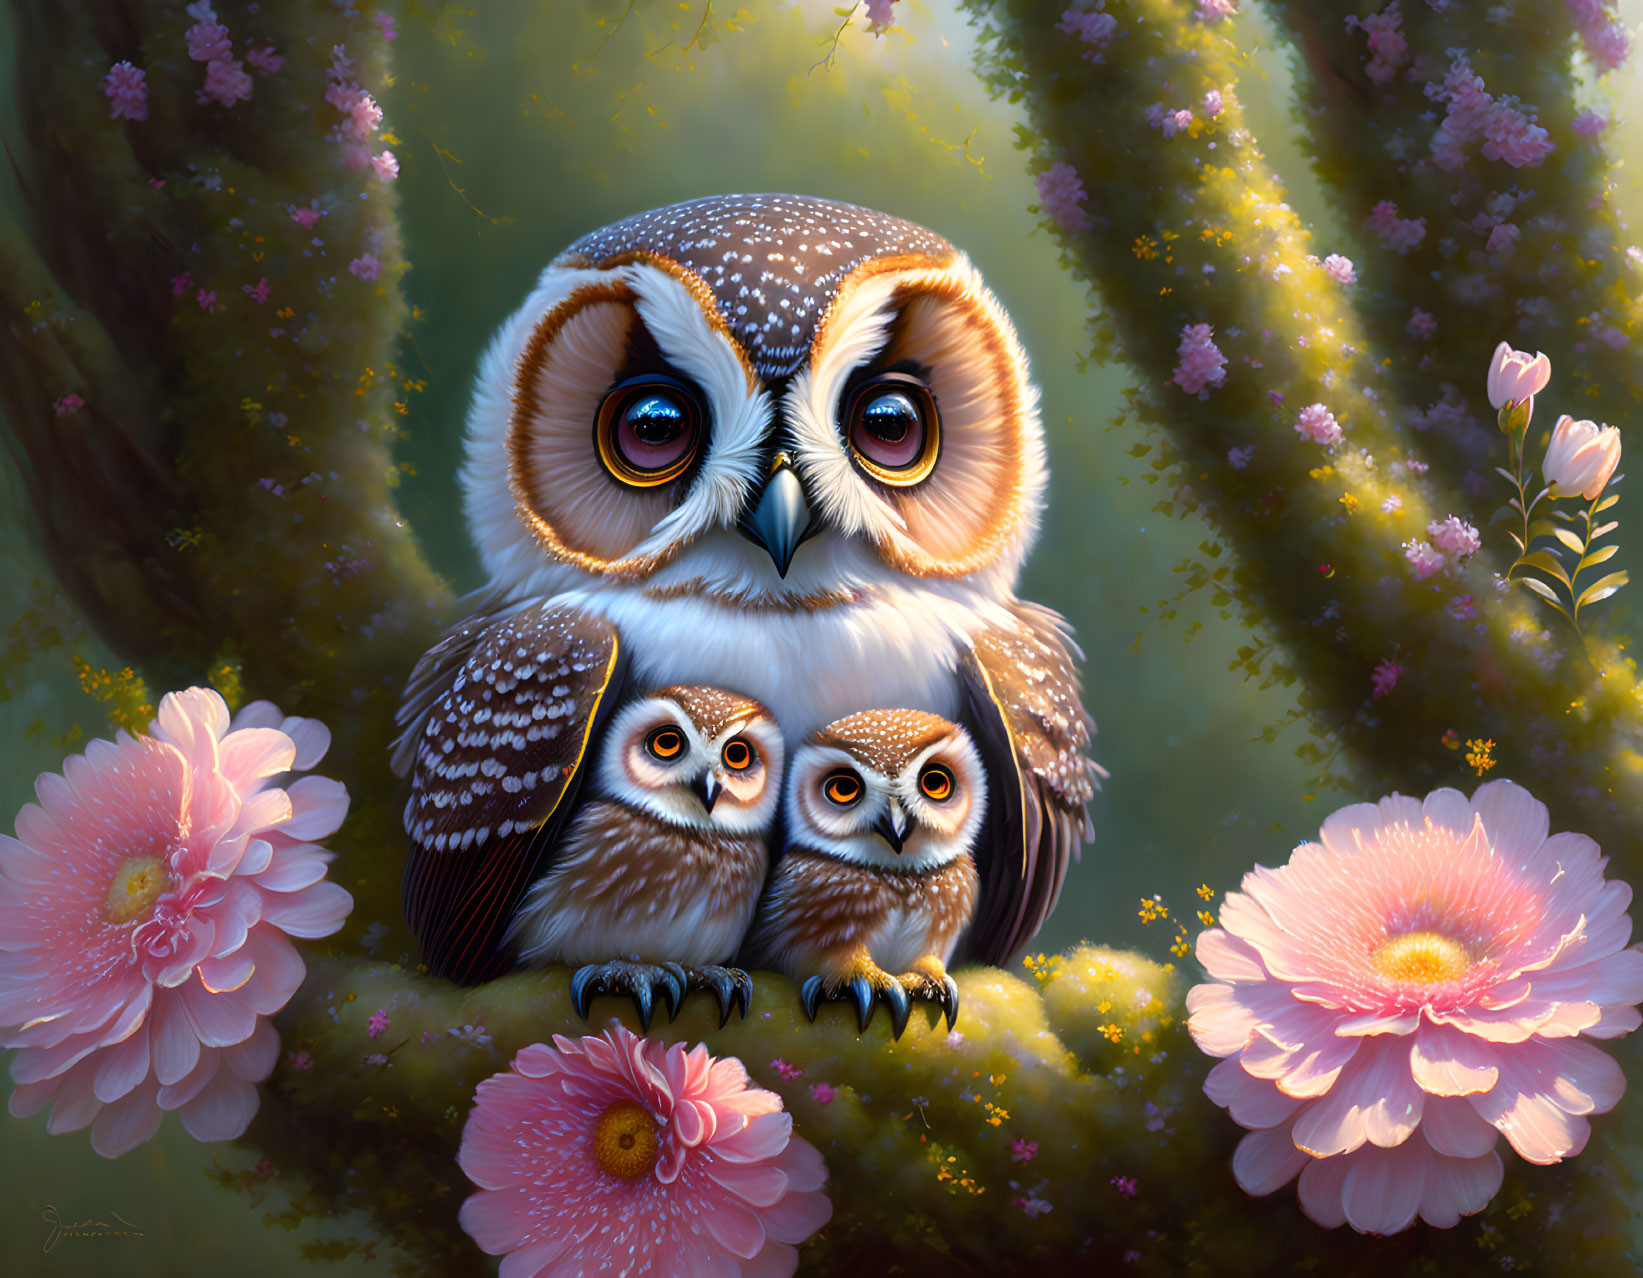 Large owl with orange eyes cuddling two smaller owls in pink flowers.